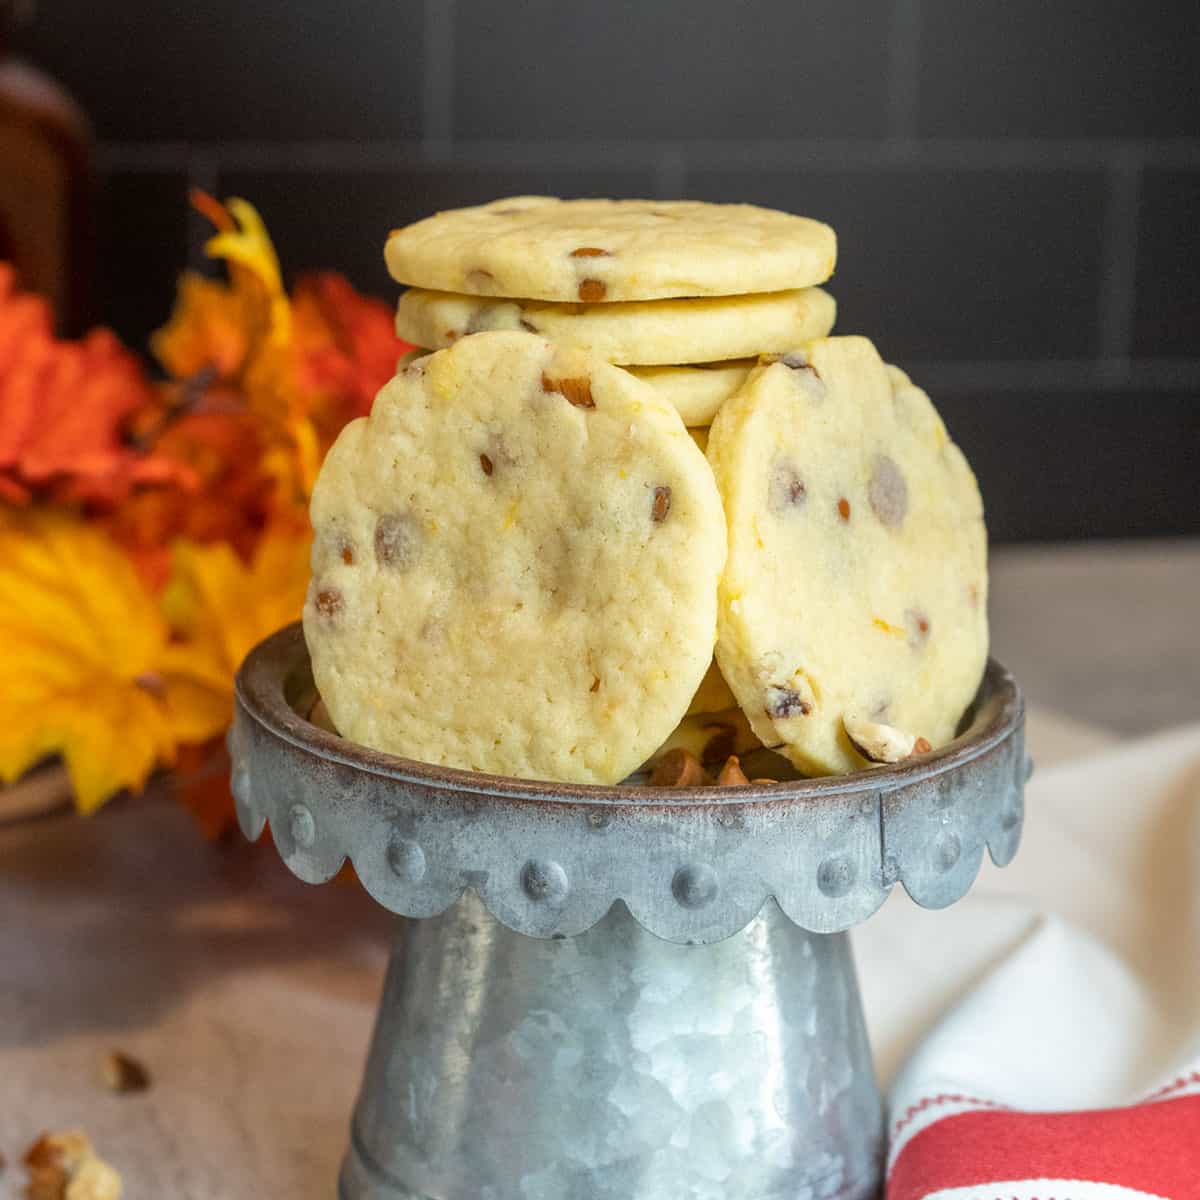 Finished Sugar Cookies with Cinnamon Chips and Orange cookies in a stack on a metal pedestal.